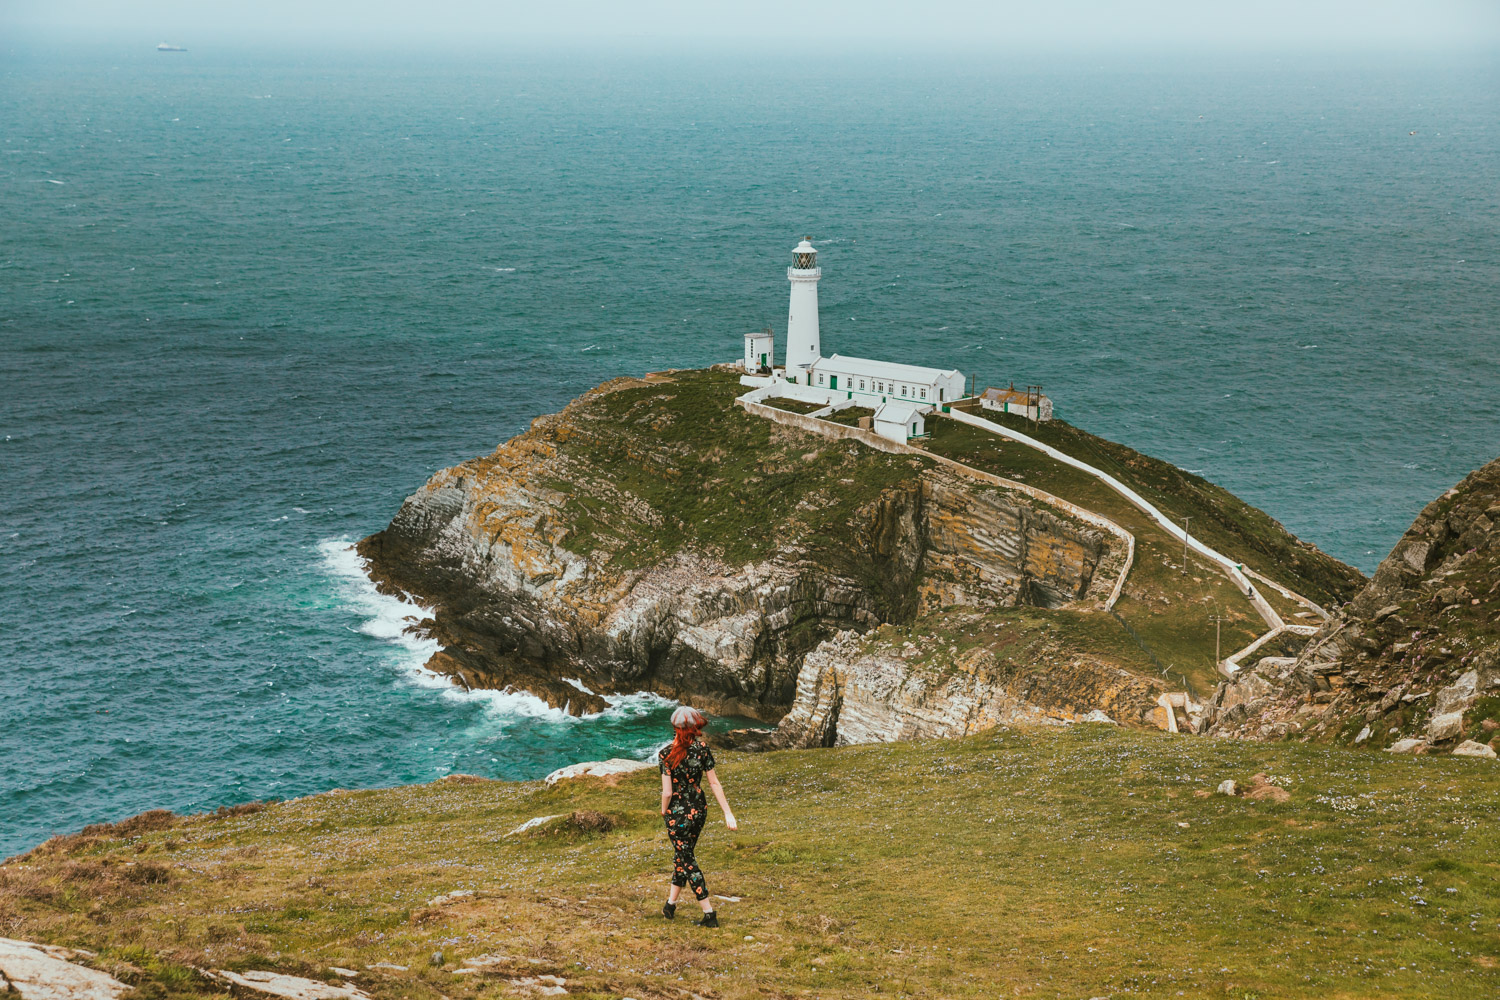 South Stack Lighthouse in Anglesey // The Most Beautiful Places to Visit in Wales // #readysetjetset #wales #uk #welsh #travel #photospots #blogpost